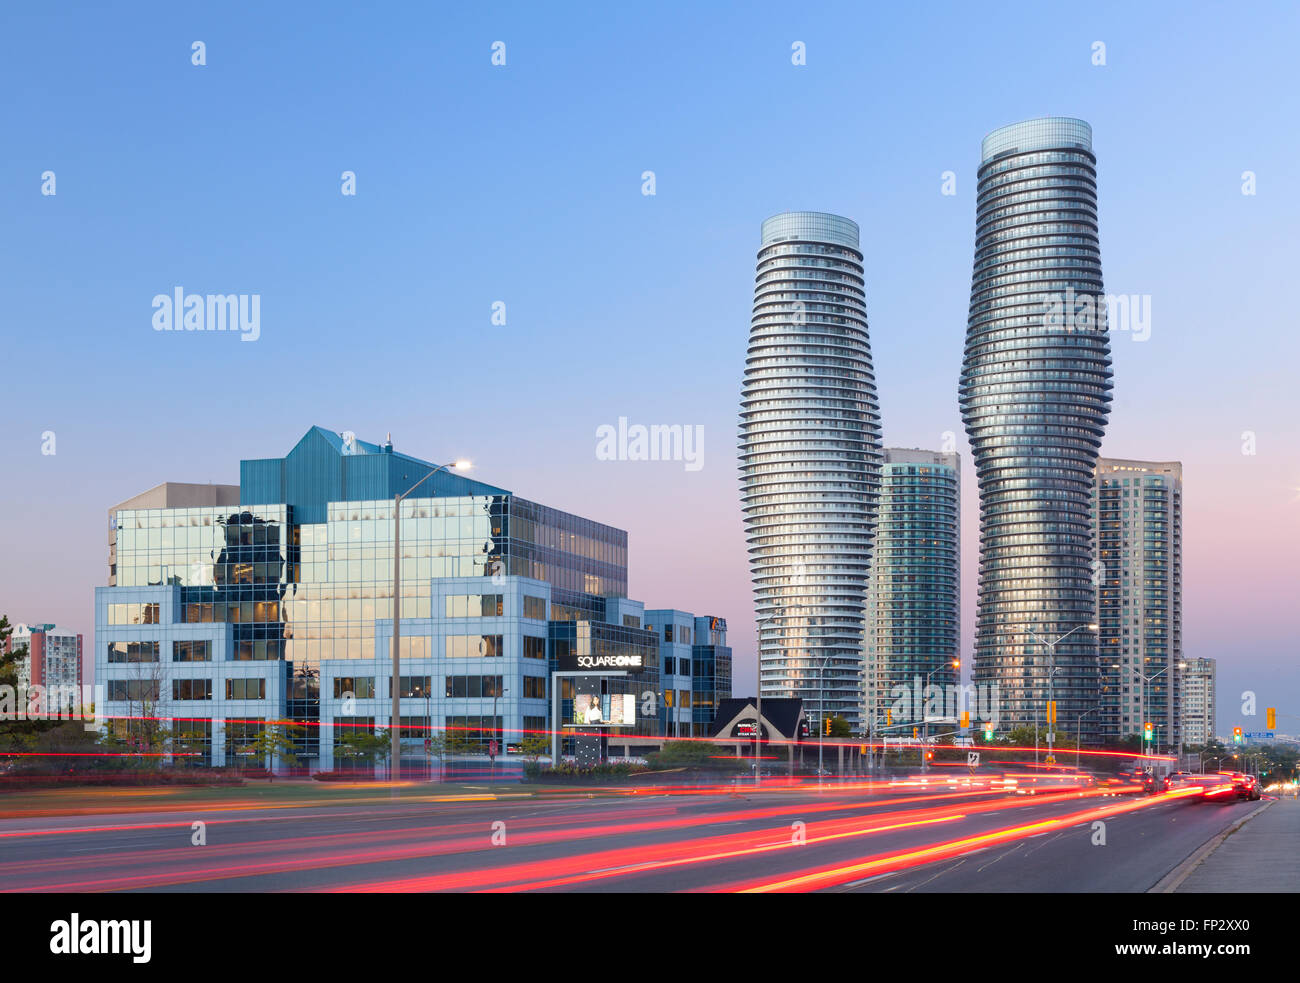 Absolute World Towers 4 & 5 (The Marilyn Monroe Towers) at dusk. Mississauga, Peel Region, Ontario, Canada. Stock Photo